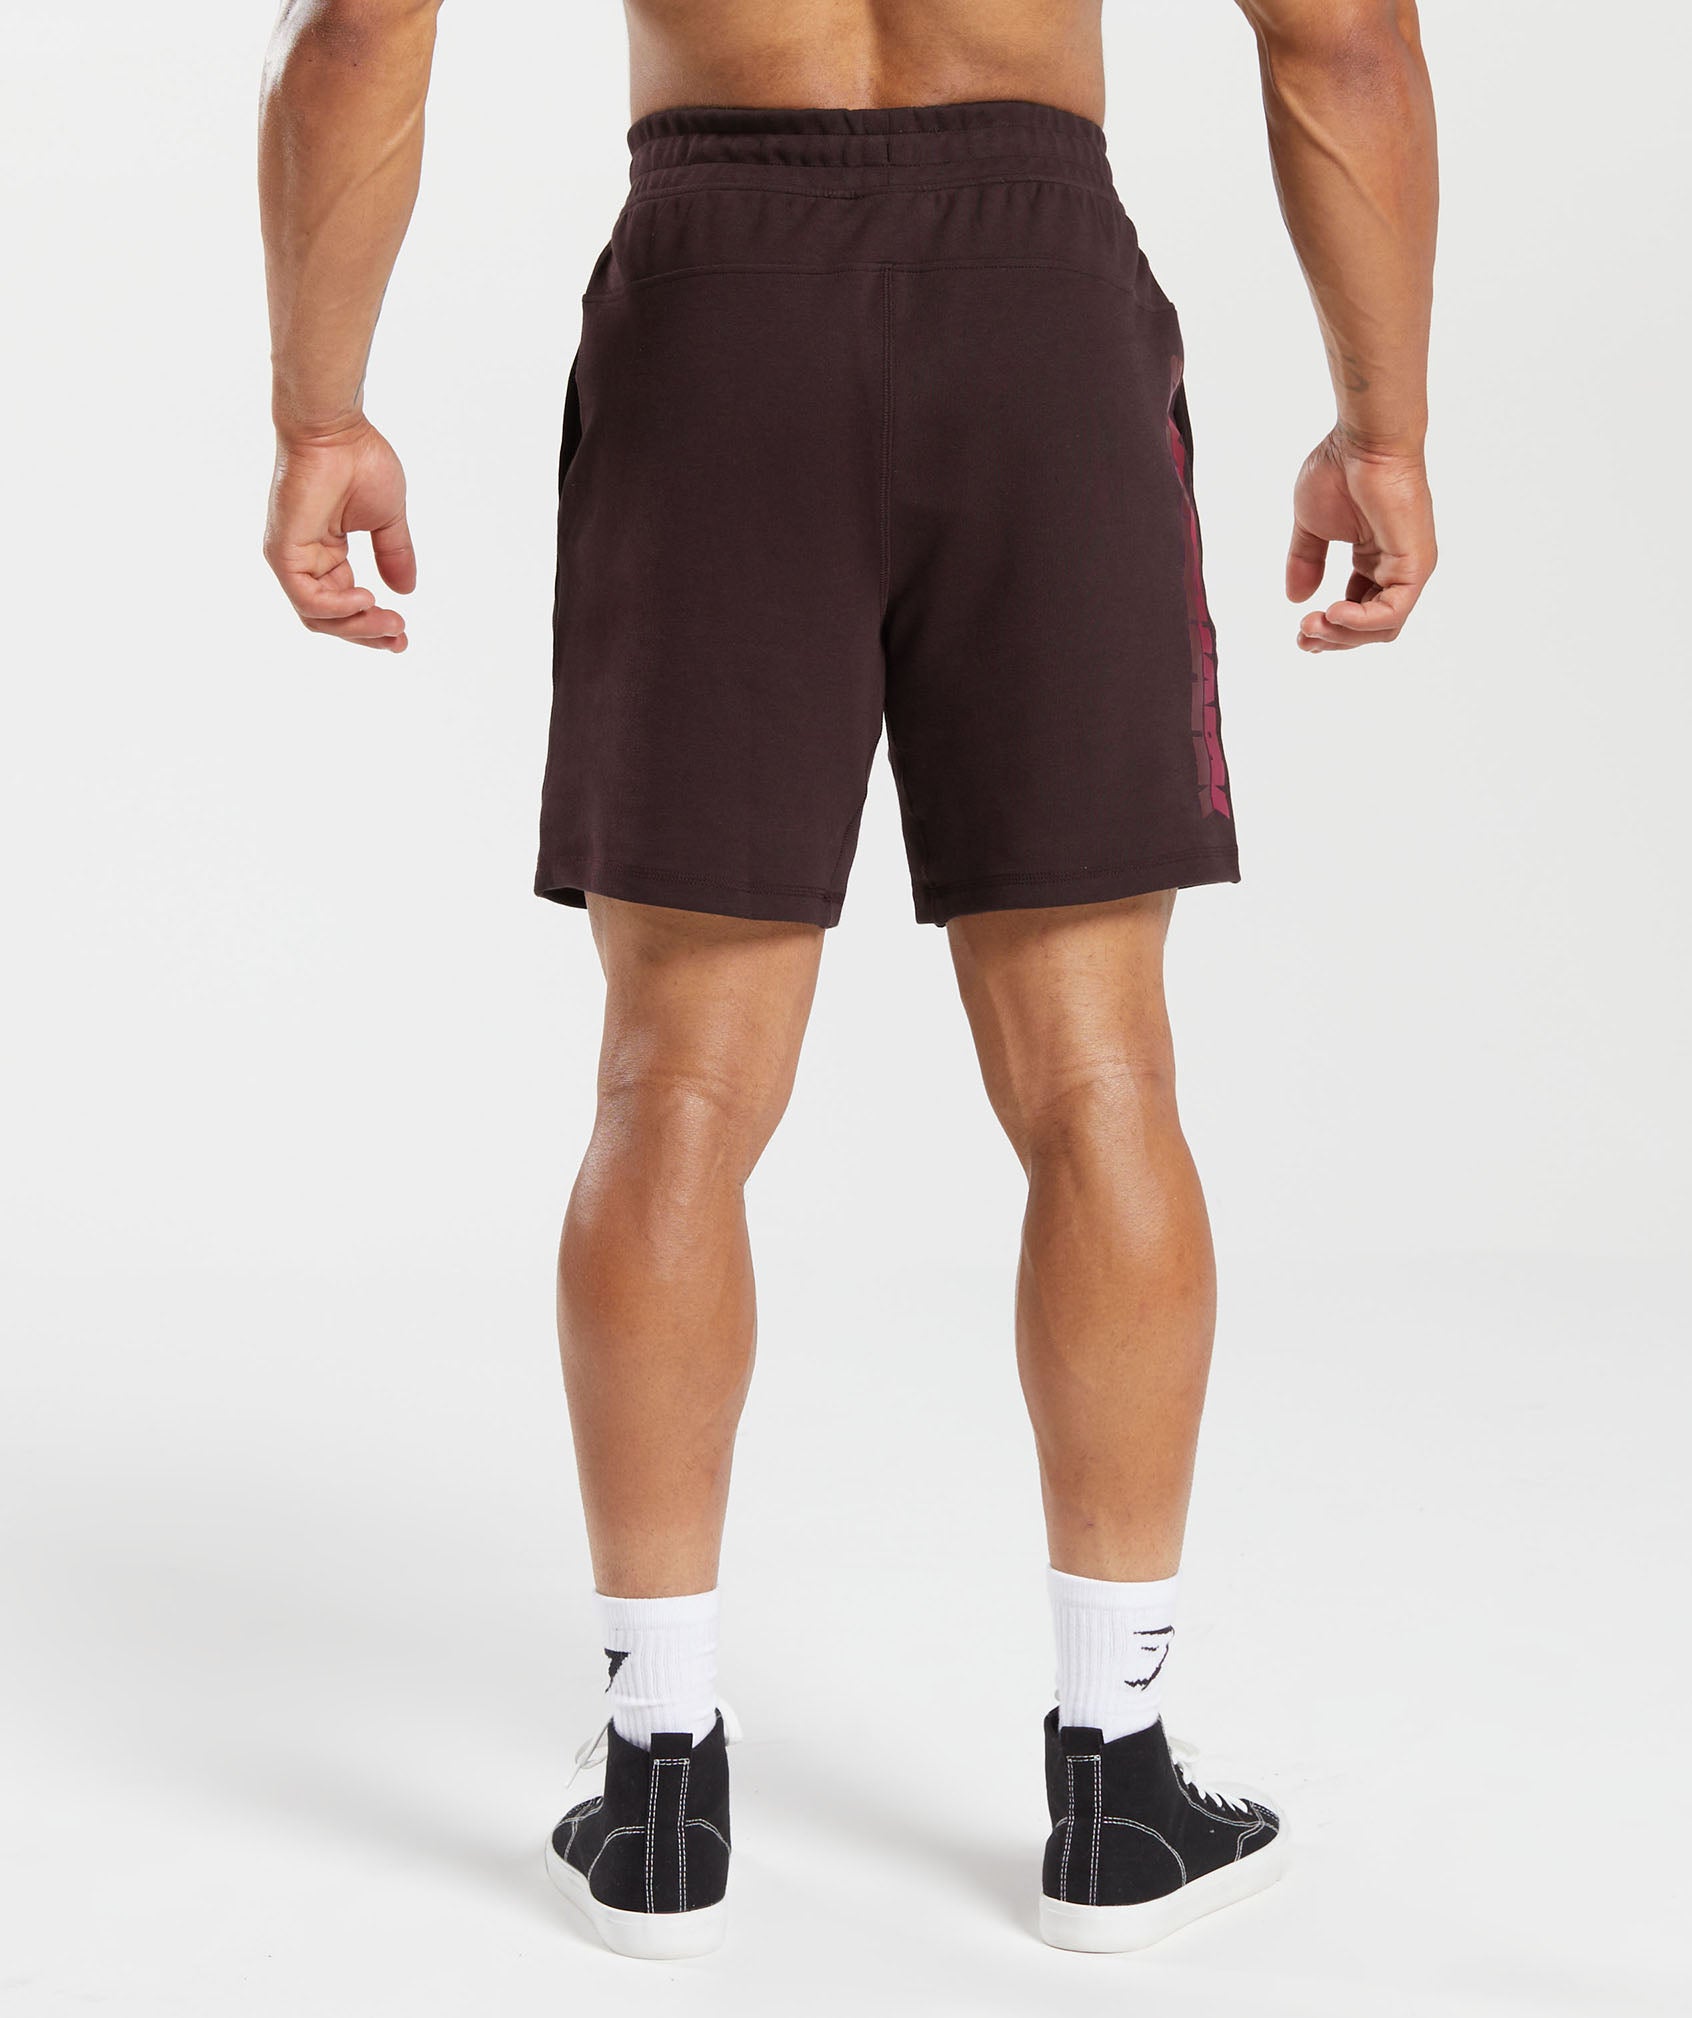 Bold 7" Shorts in Plum Brown - view 3